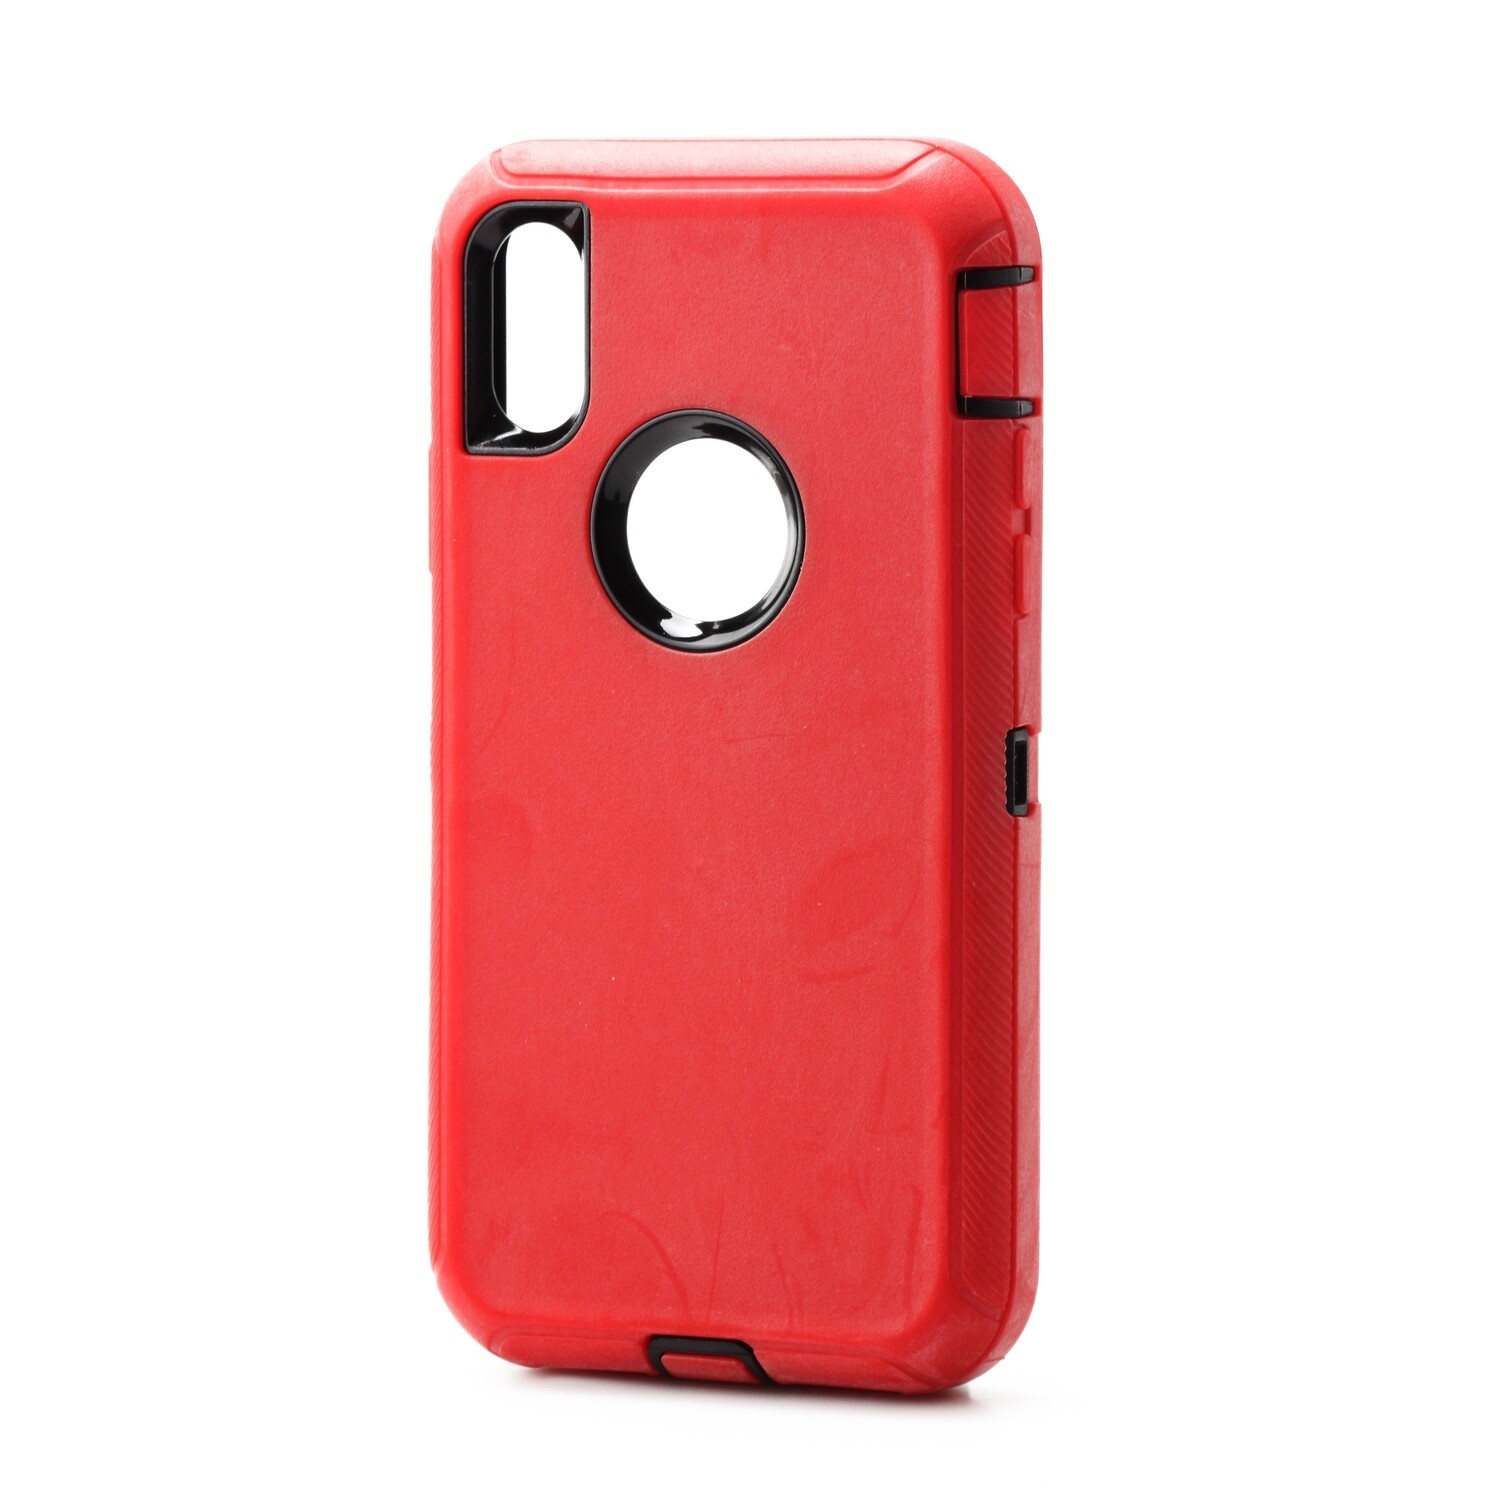 iPhone Xs Max 6.5 Tough Guardian Robot ShockProof Case, Color: Red